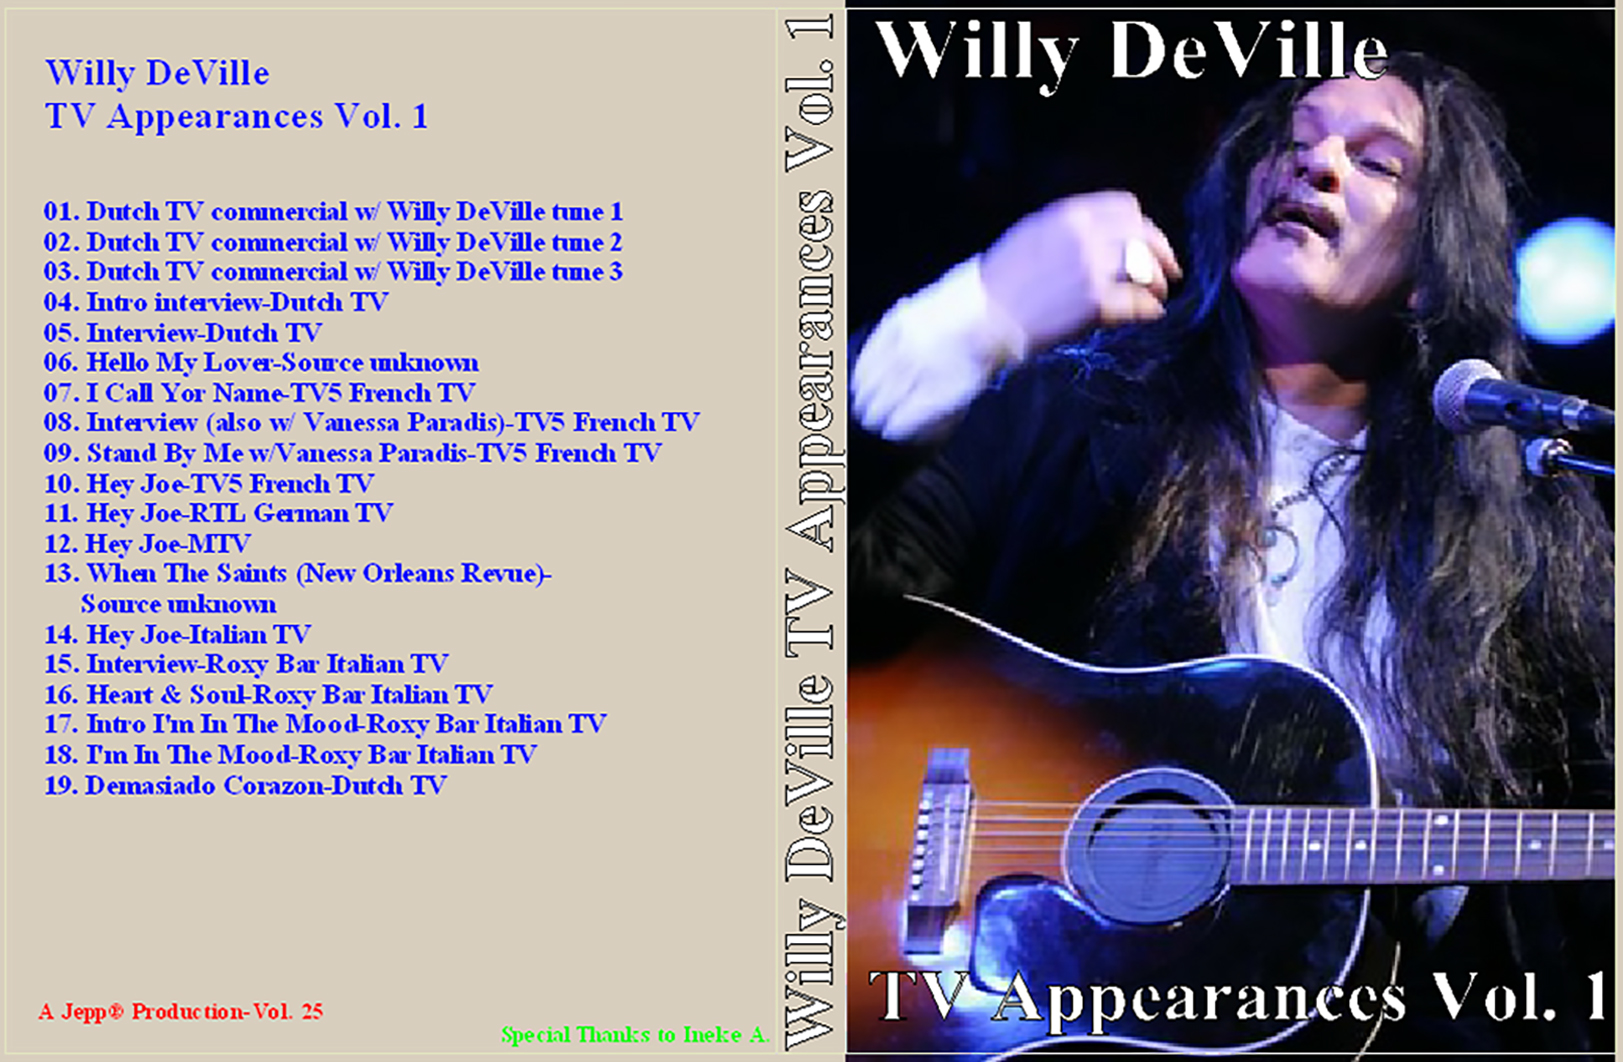 willy deville dvdr tv appearances vol 1 cover